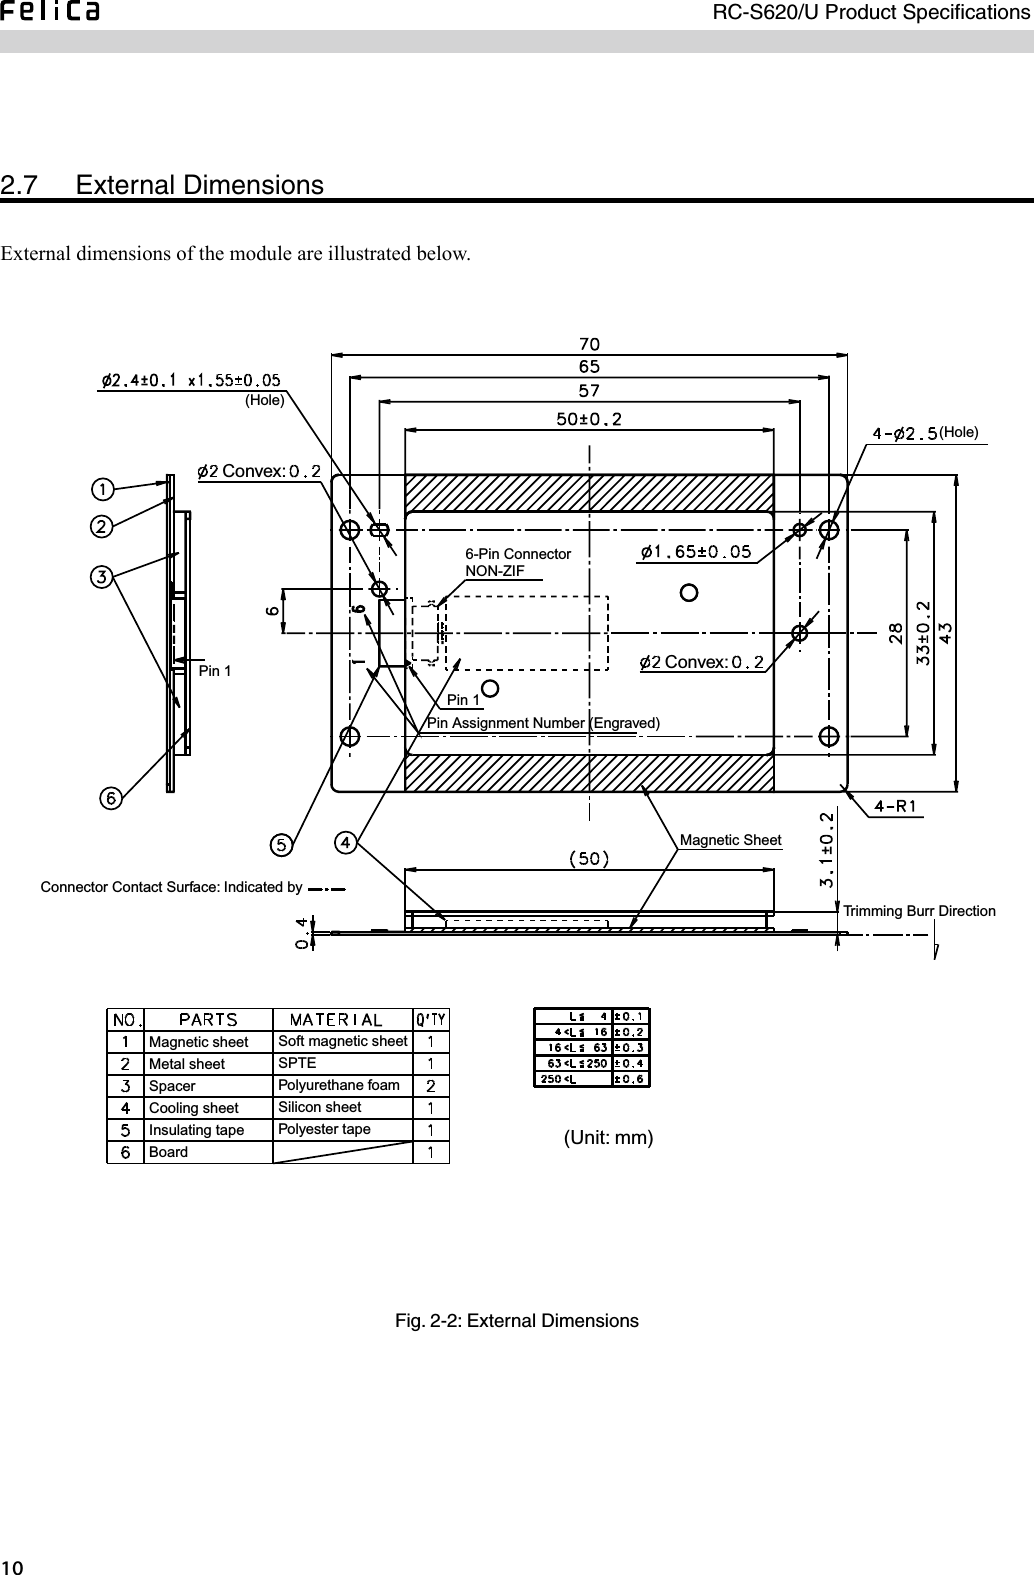 RC-S620/U Product Speciﬁcations02.7  External DimensionsExternal dimensions of the module are illustrated below.Fig. 2-2: External Dimensions(Hole)(Hole)Convex:Convex:Pin 1Pin 1Connector Contact Surface: Indicated by6-Pin ConnectorNON-ZIFPin Assignment Number (Engraved)Magnetic SheetTrimming Burr DirectionMagnetic sheetMetal sheetSpacerCooling sheetInsulating tapeBoardSoft magnetic sheetSPTEPolyurethane foamSilicon sheetPolyester tape (Unit: mm)